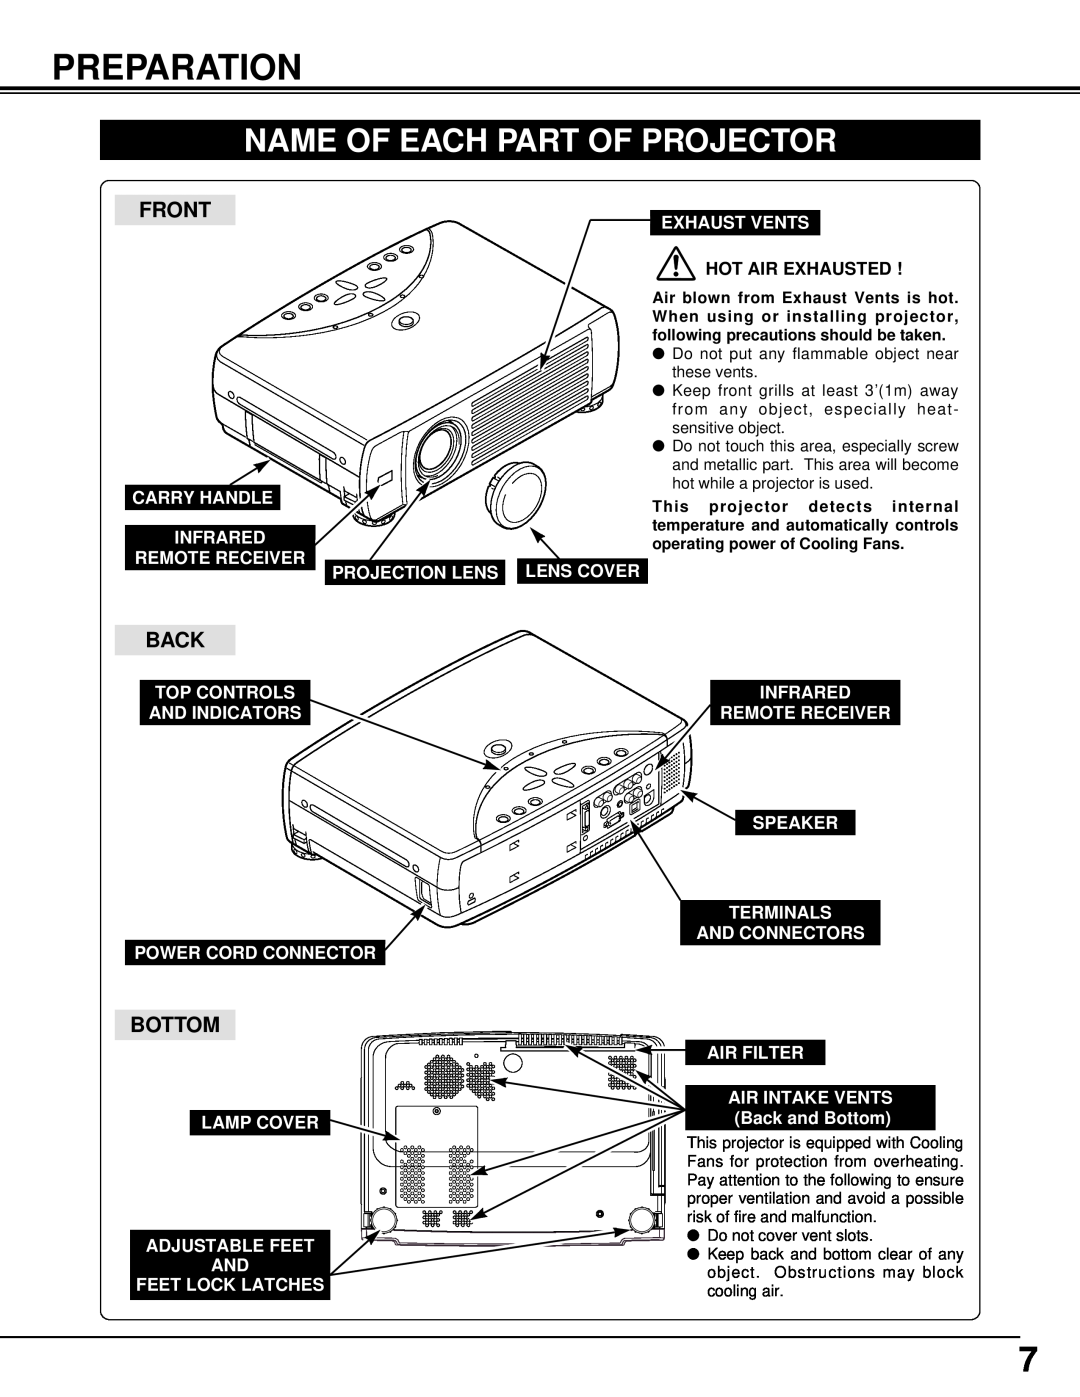 Eiki LC-NB3W owner manual Preparation, Name Of Each Part Of Projector, Carry Handle Infrared Remote Receiver, Exhaust Vents 